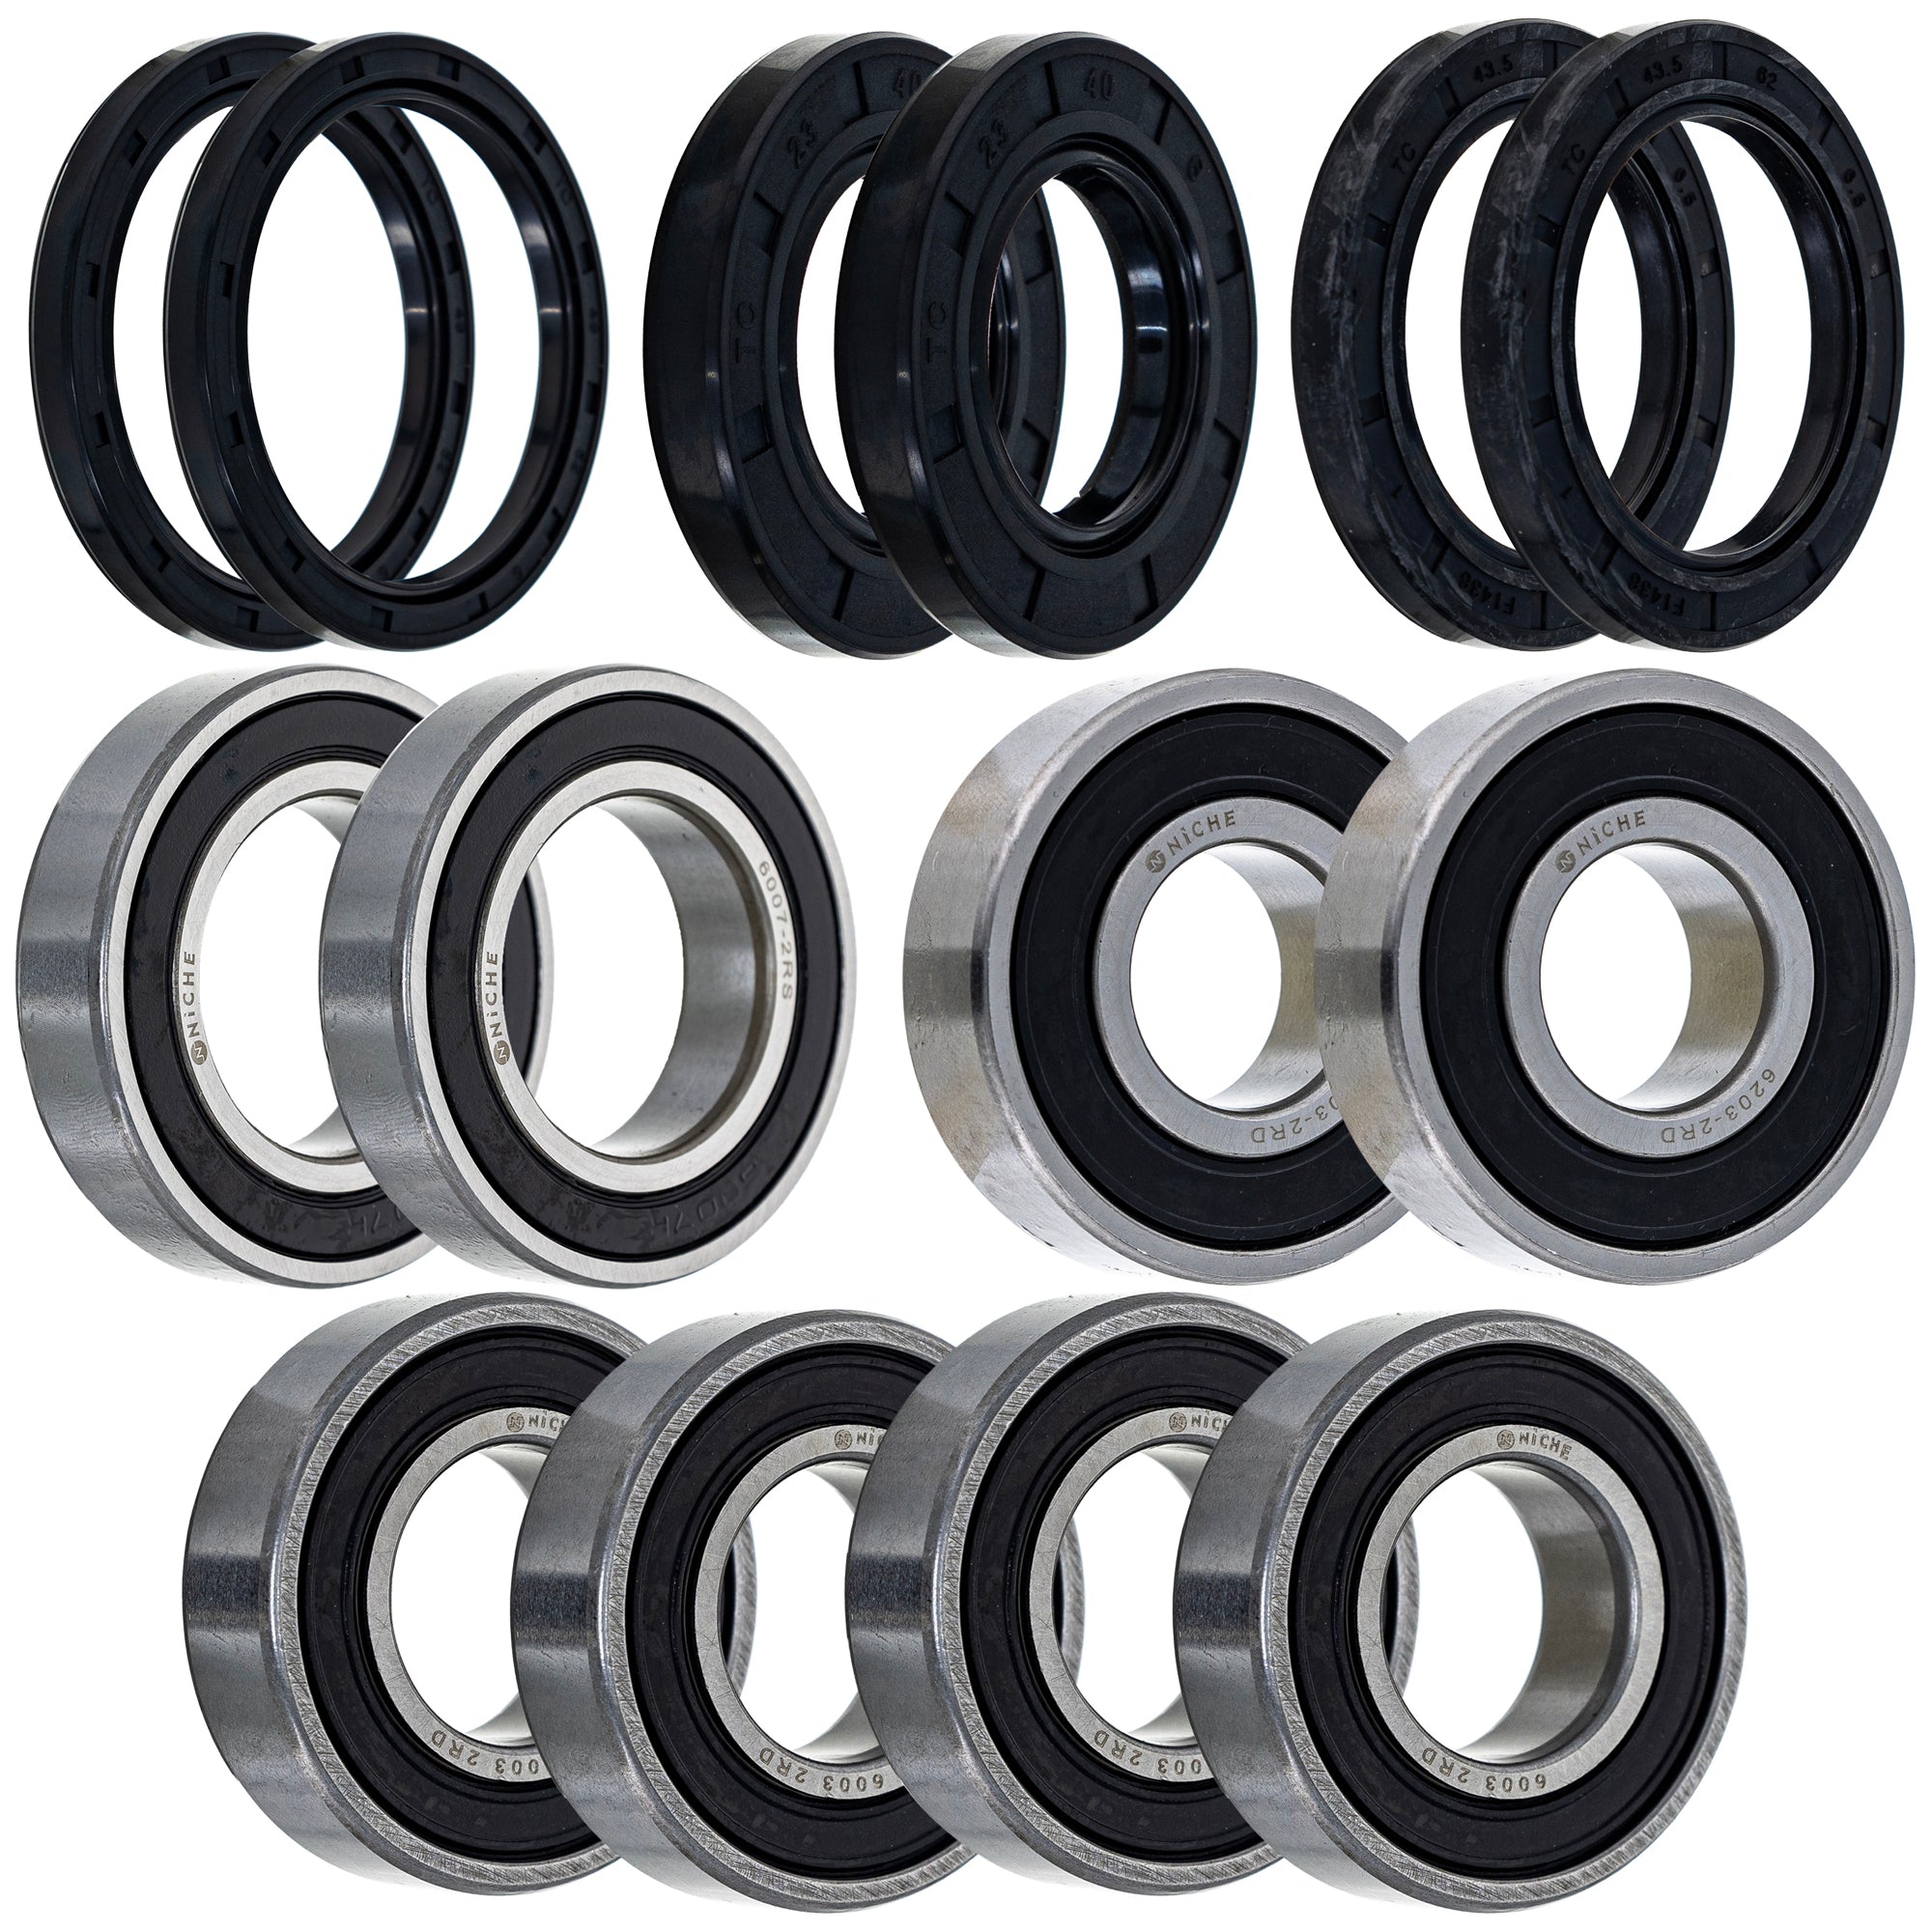 Wheel Bearing Seal Kit for zOTHER Cyclone NICHE MK1008402